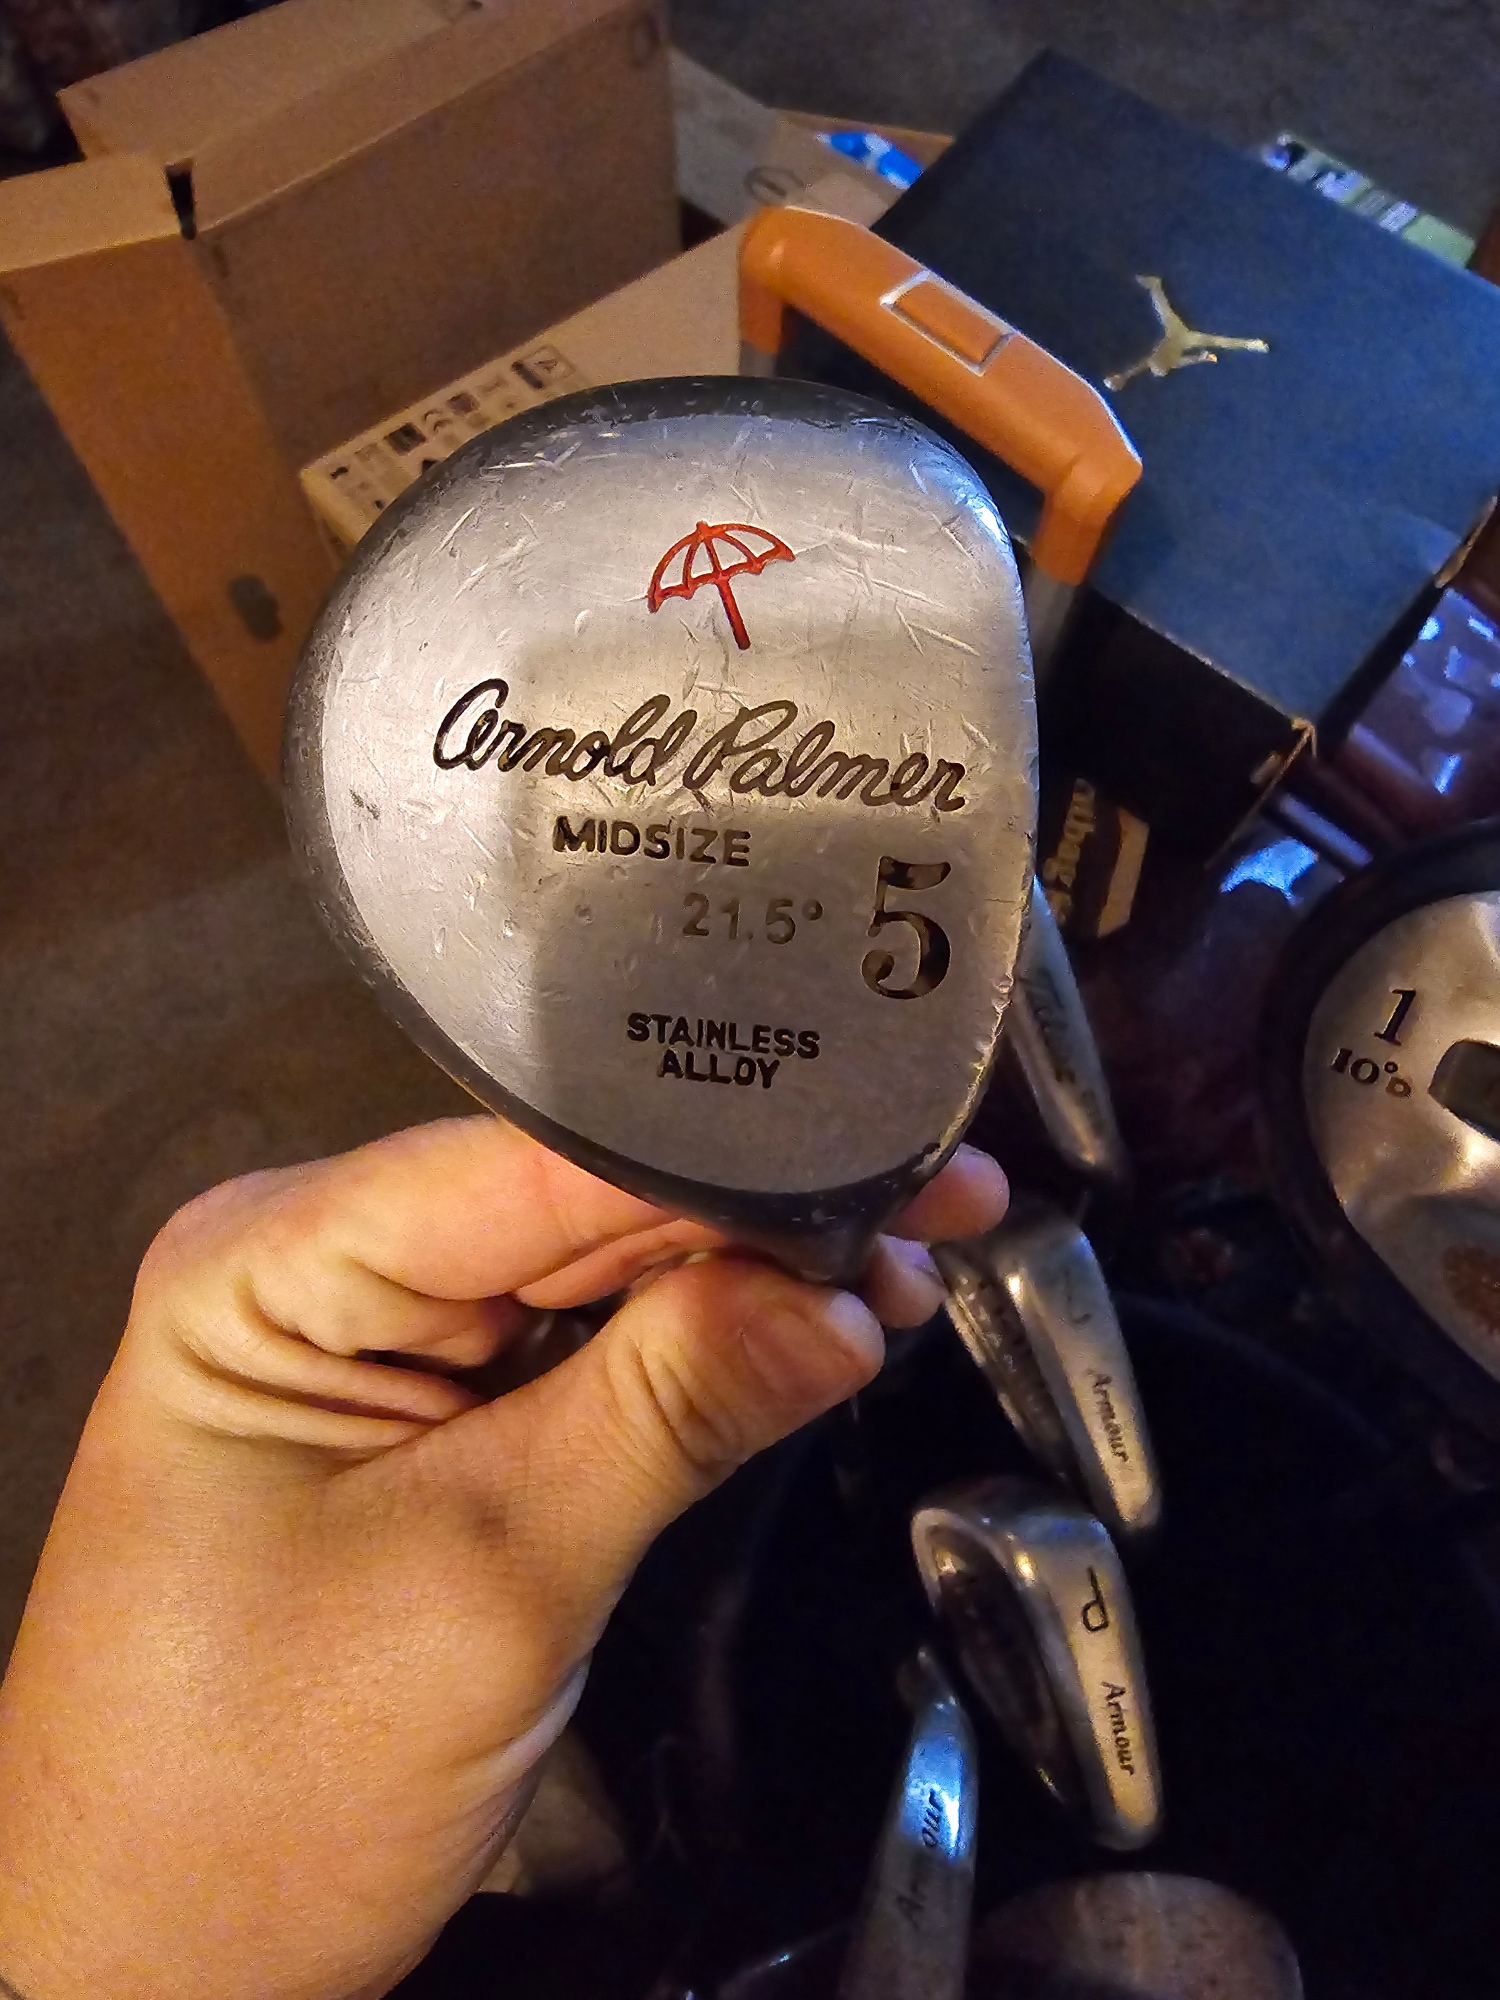 Used Men's Arnold Palmer Right Handed Fairway Wood 5 midsize 21.5° stainless alloy